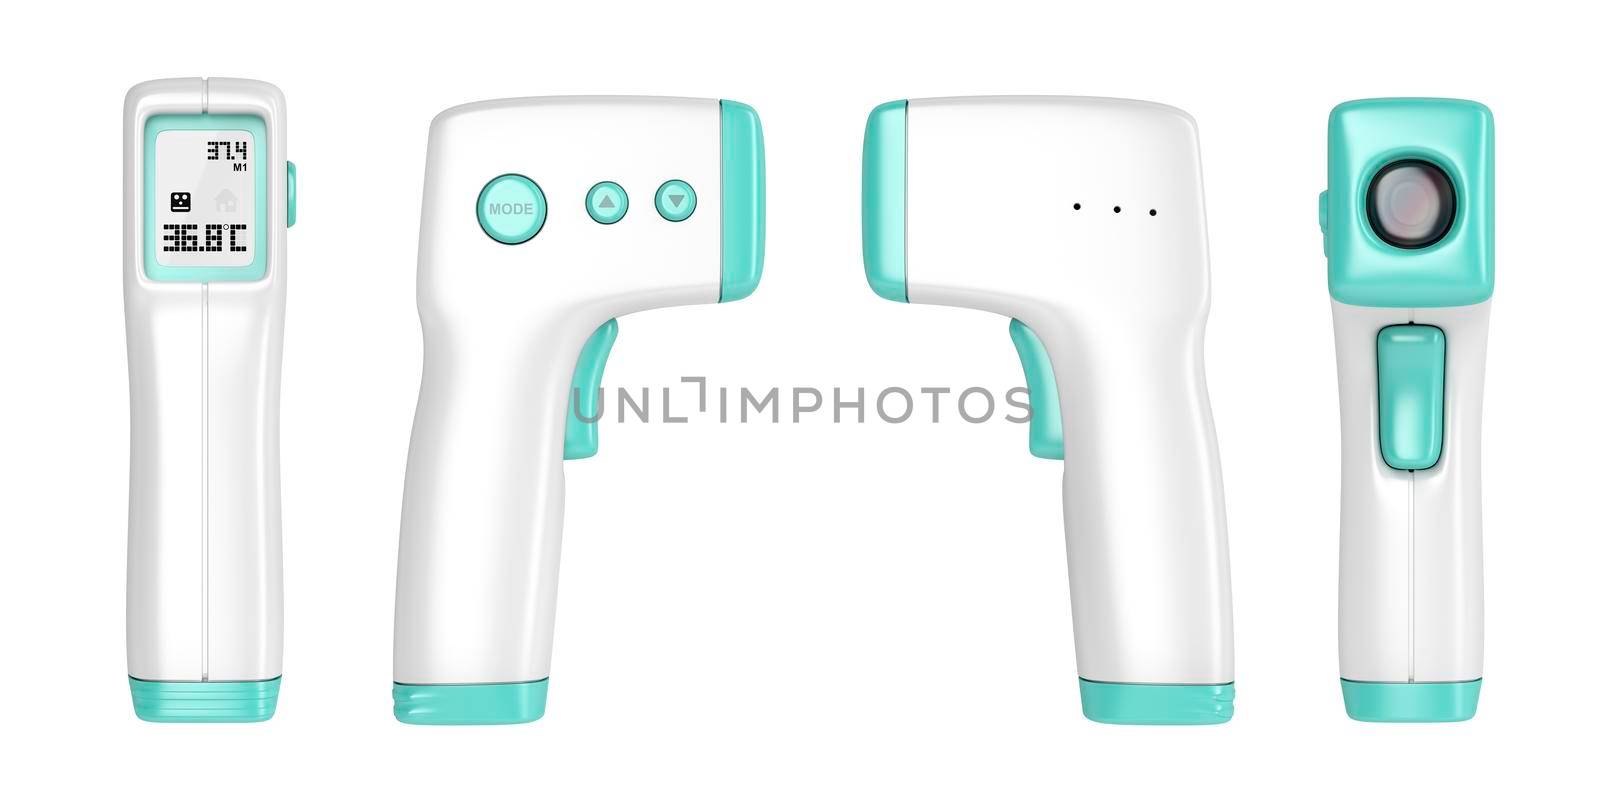 Gun shaped infrared thermometer by magraphics